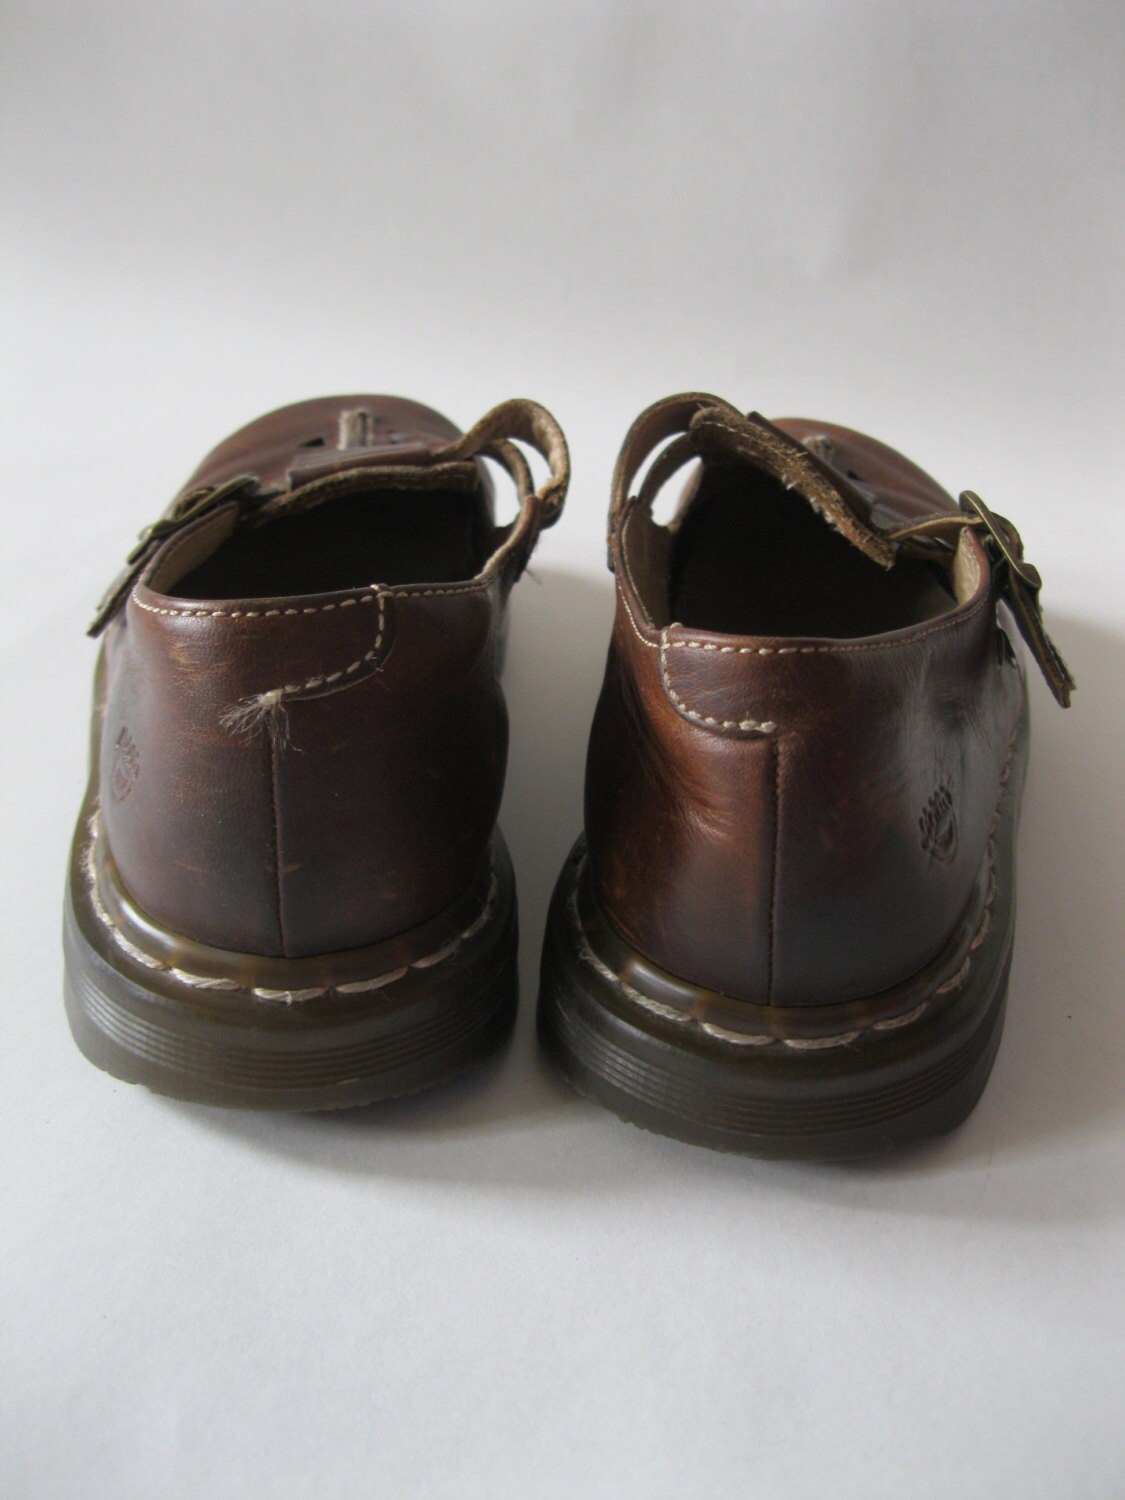 Vintage Doc Martens shoes pierced Mary Janes by afterglowvintage